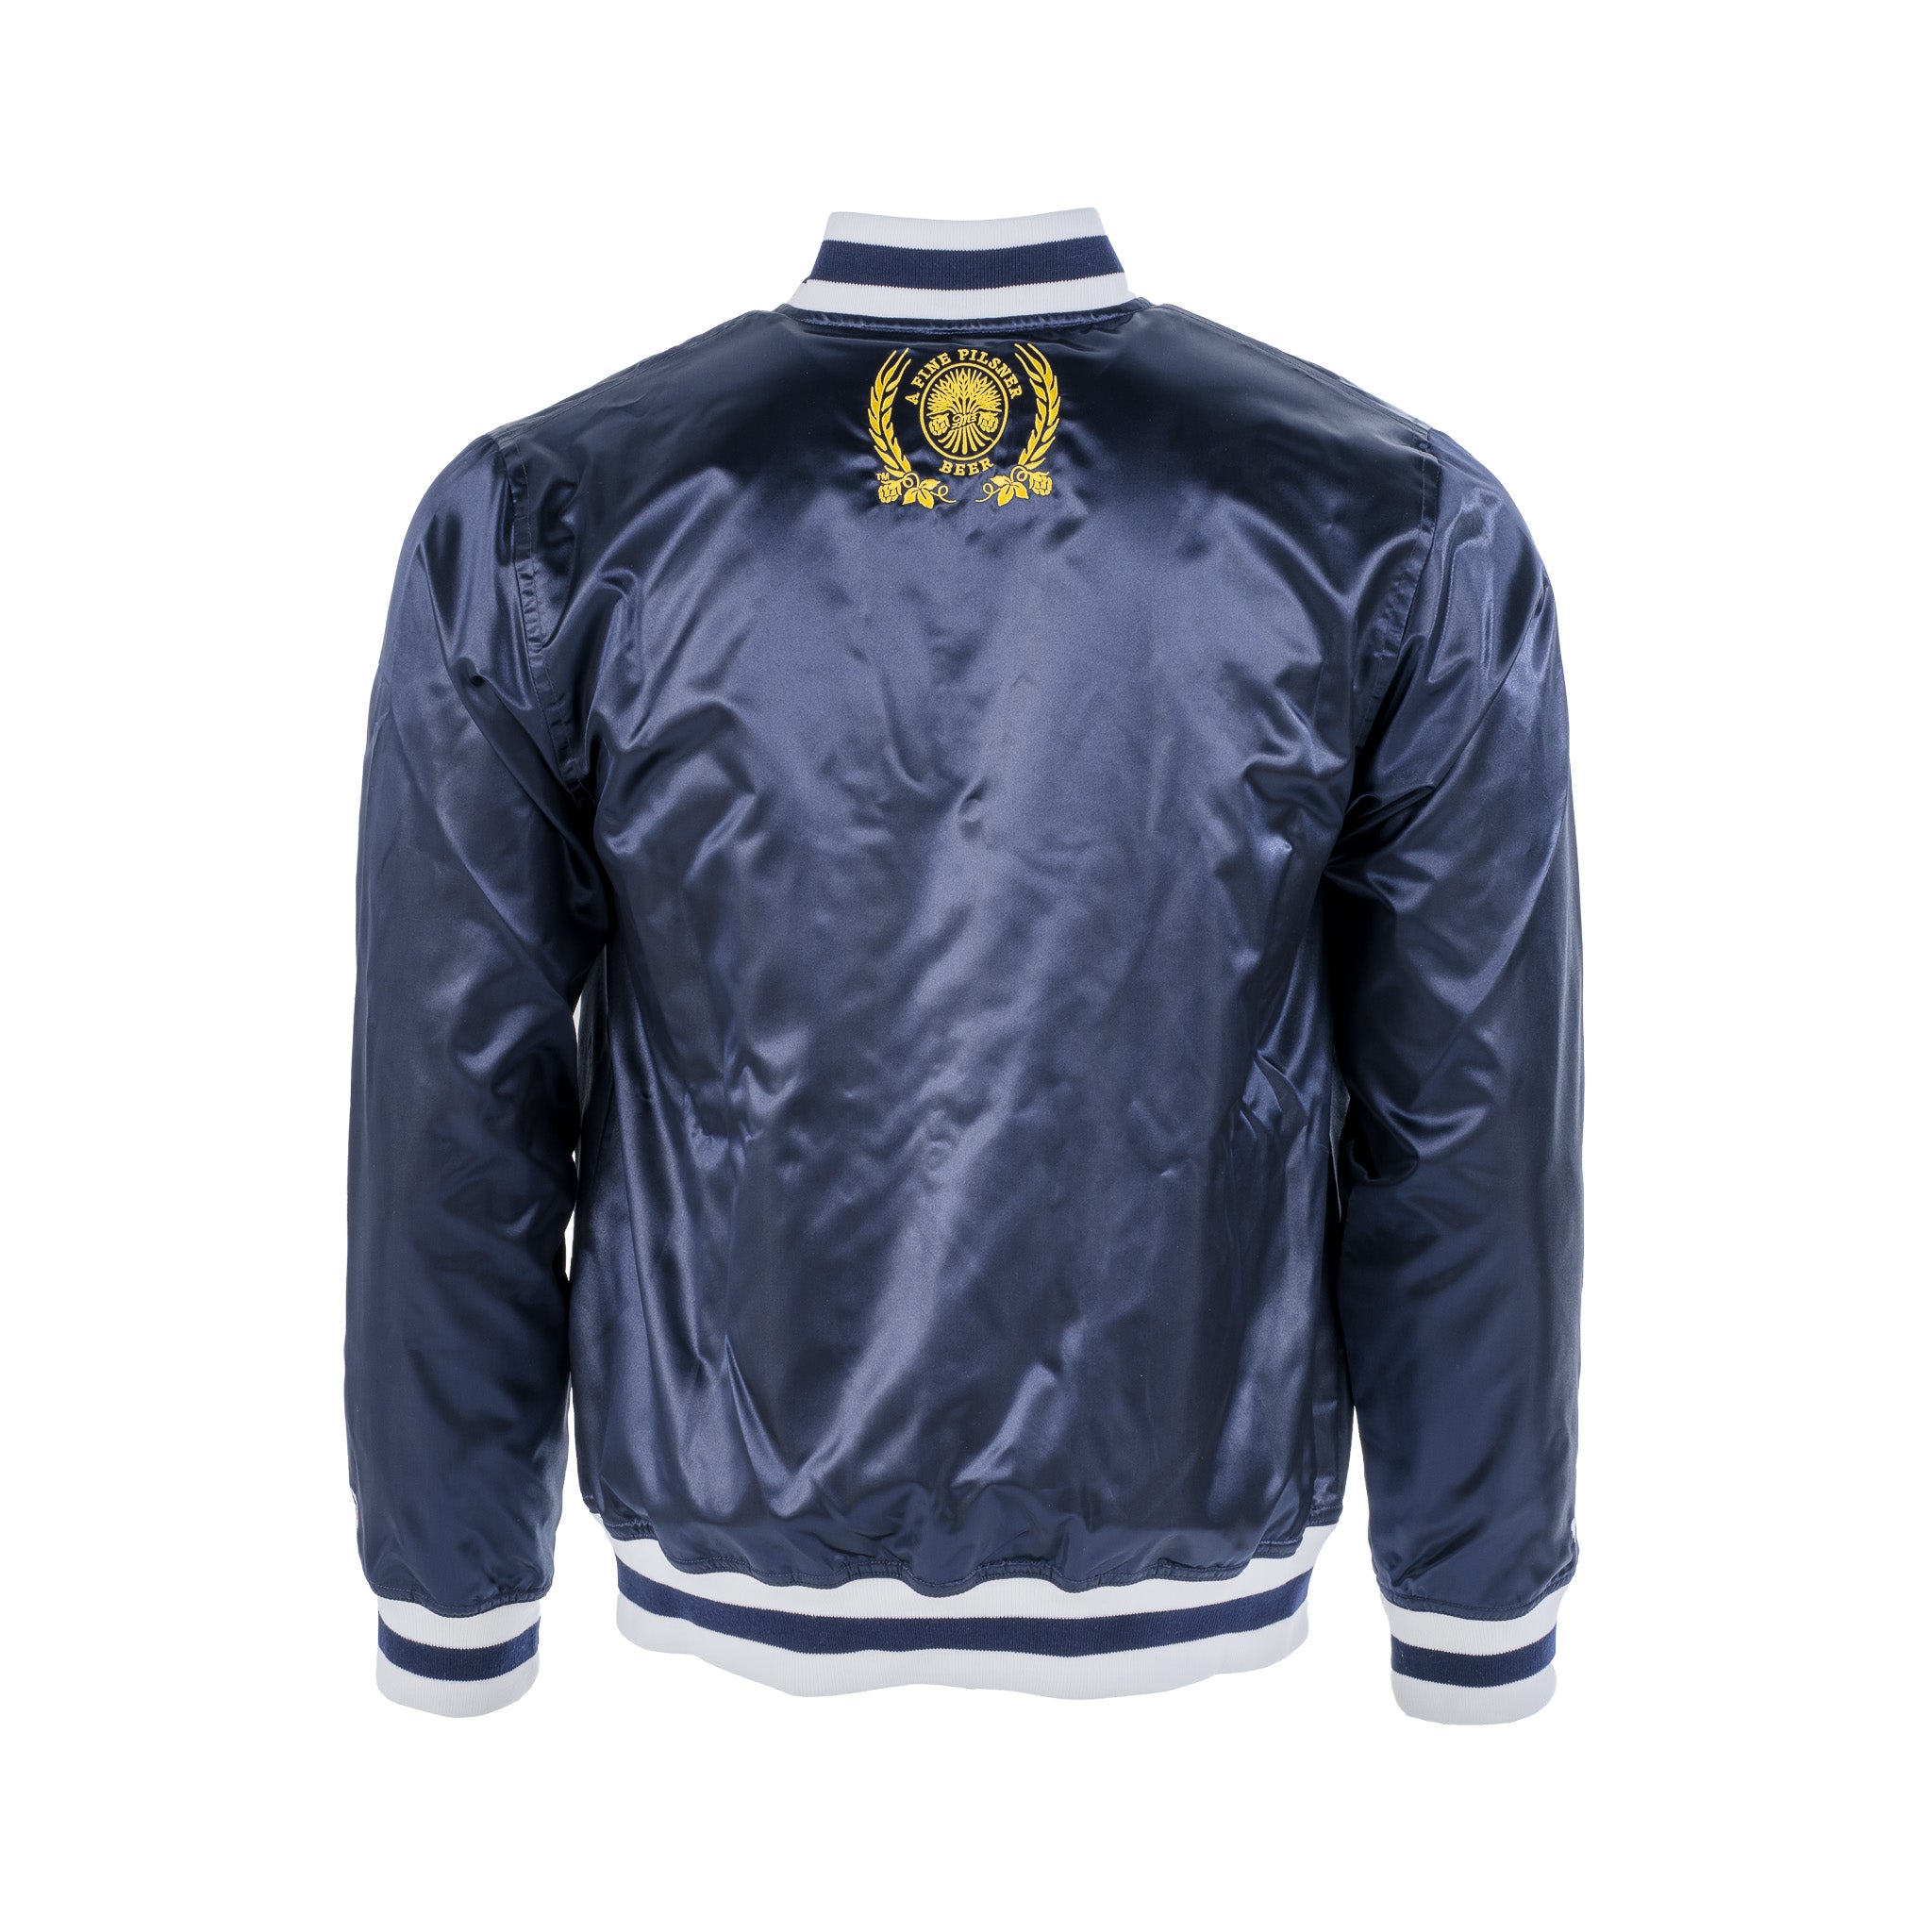 MITCHELL & NESS The Golden State Warriors Satin Bomber Jacket in